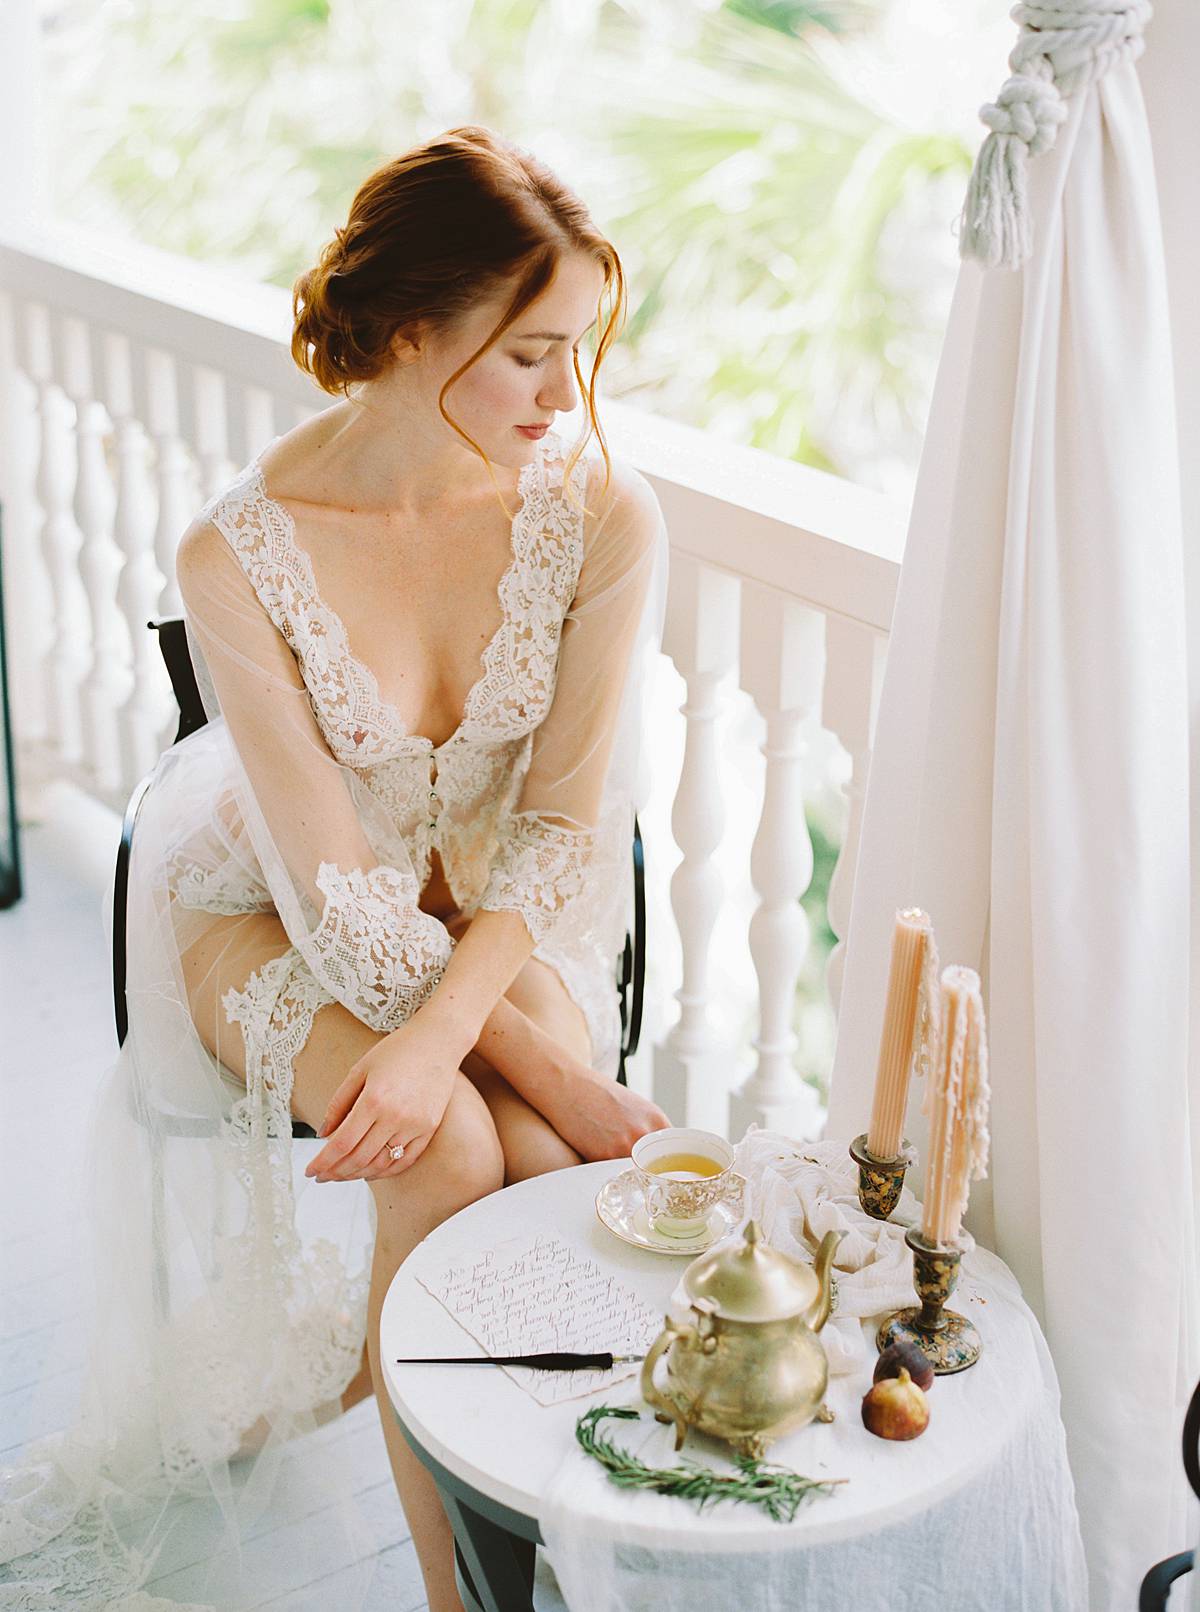 charleston wedding bridal boudoir morning getting ready at 86 cannon street on film with bride in lingerie writing love letter